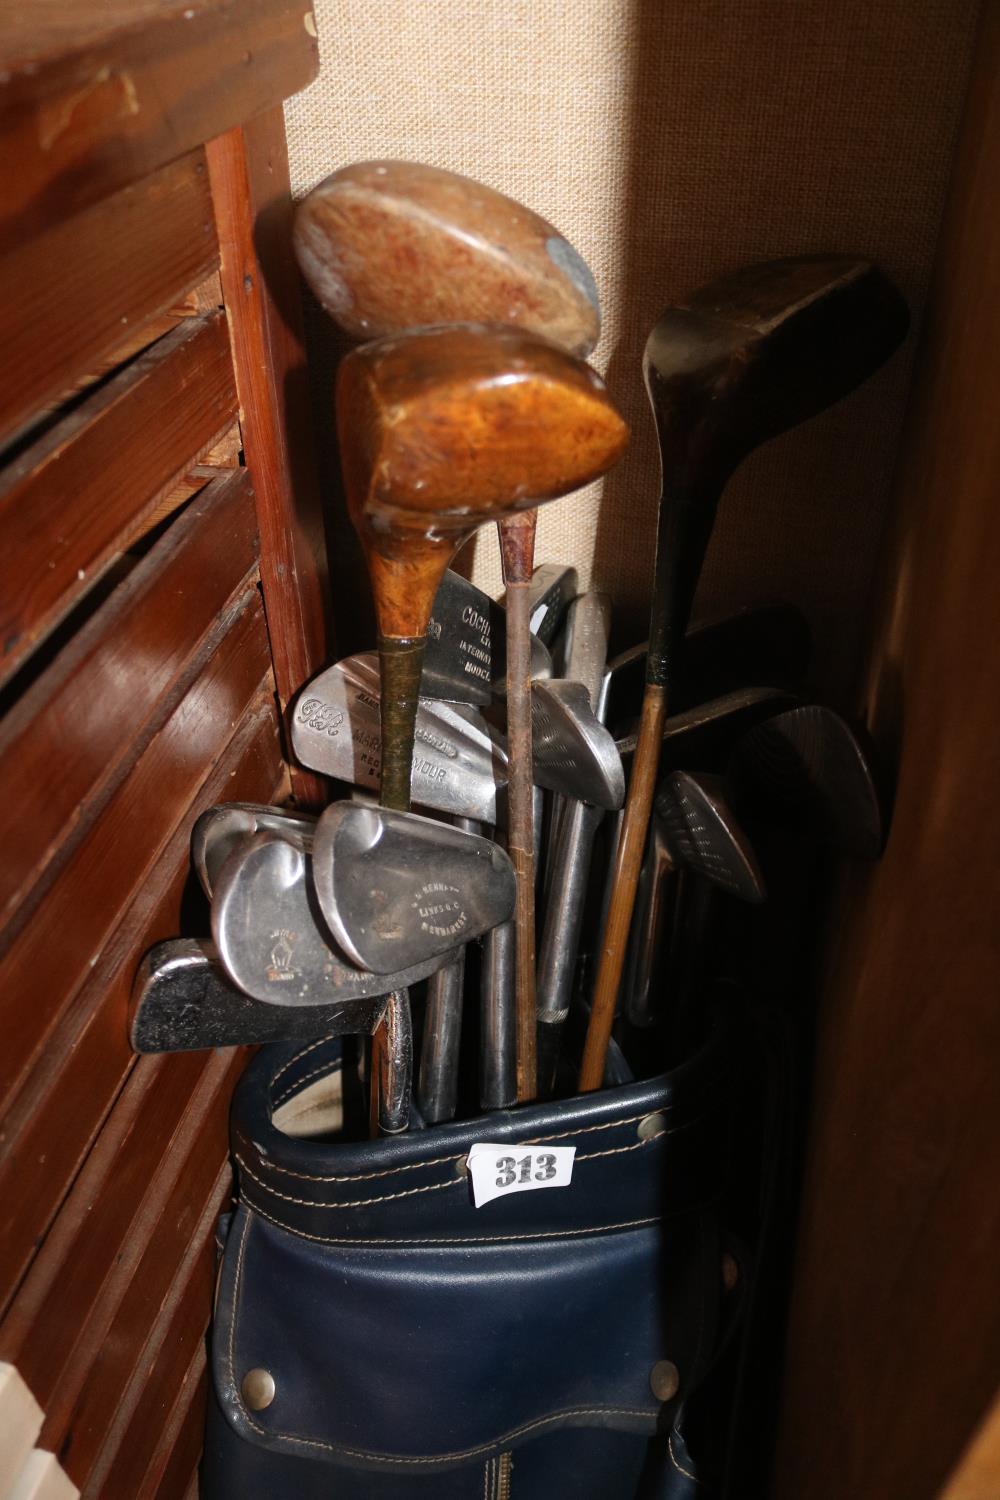 Bryant Golf Bag containing Vintage Golf Clubs inc Mitre Brand for Newmarket Links Golf Club c1930, - Image 2 of 2